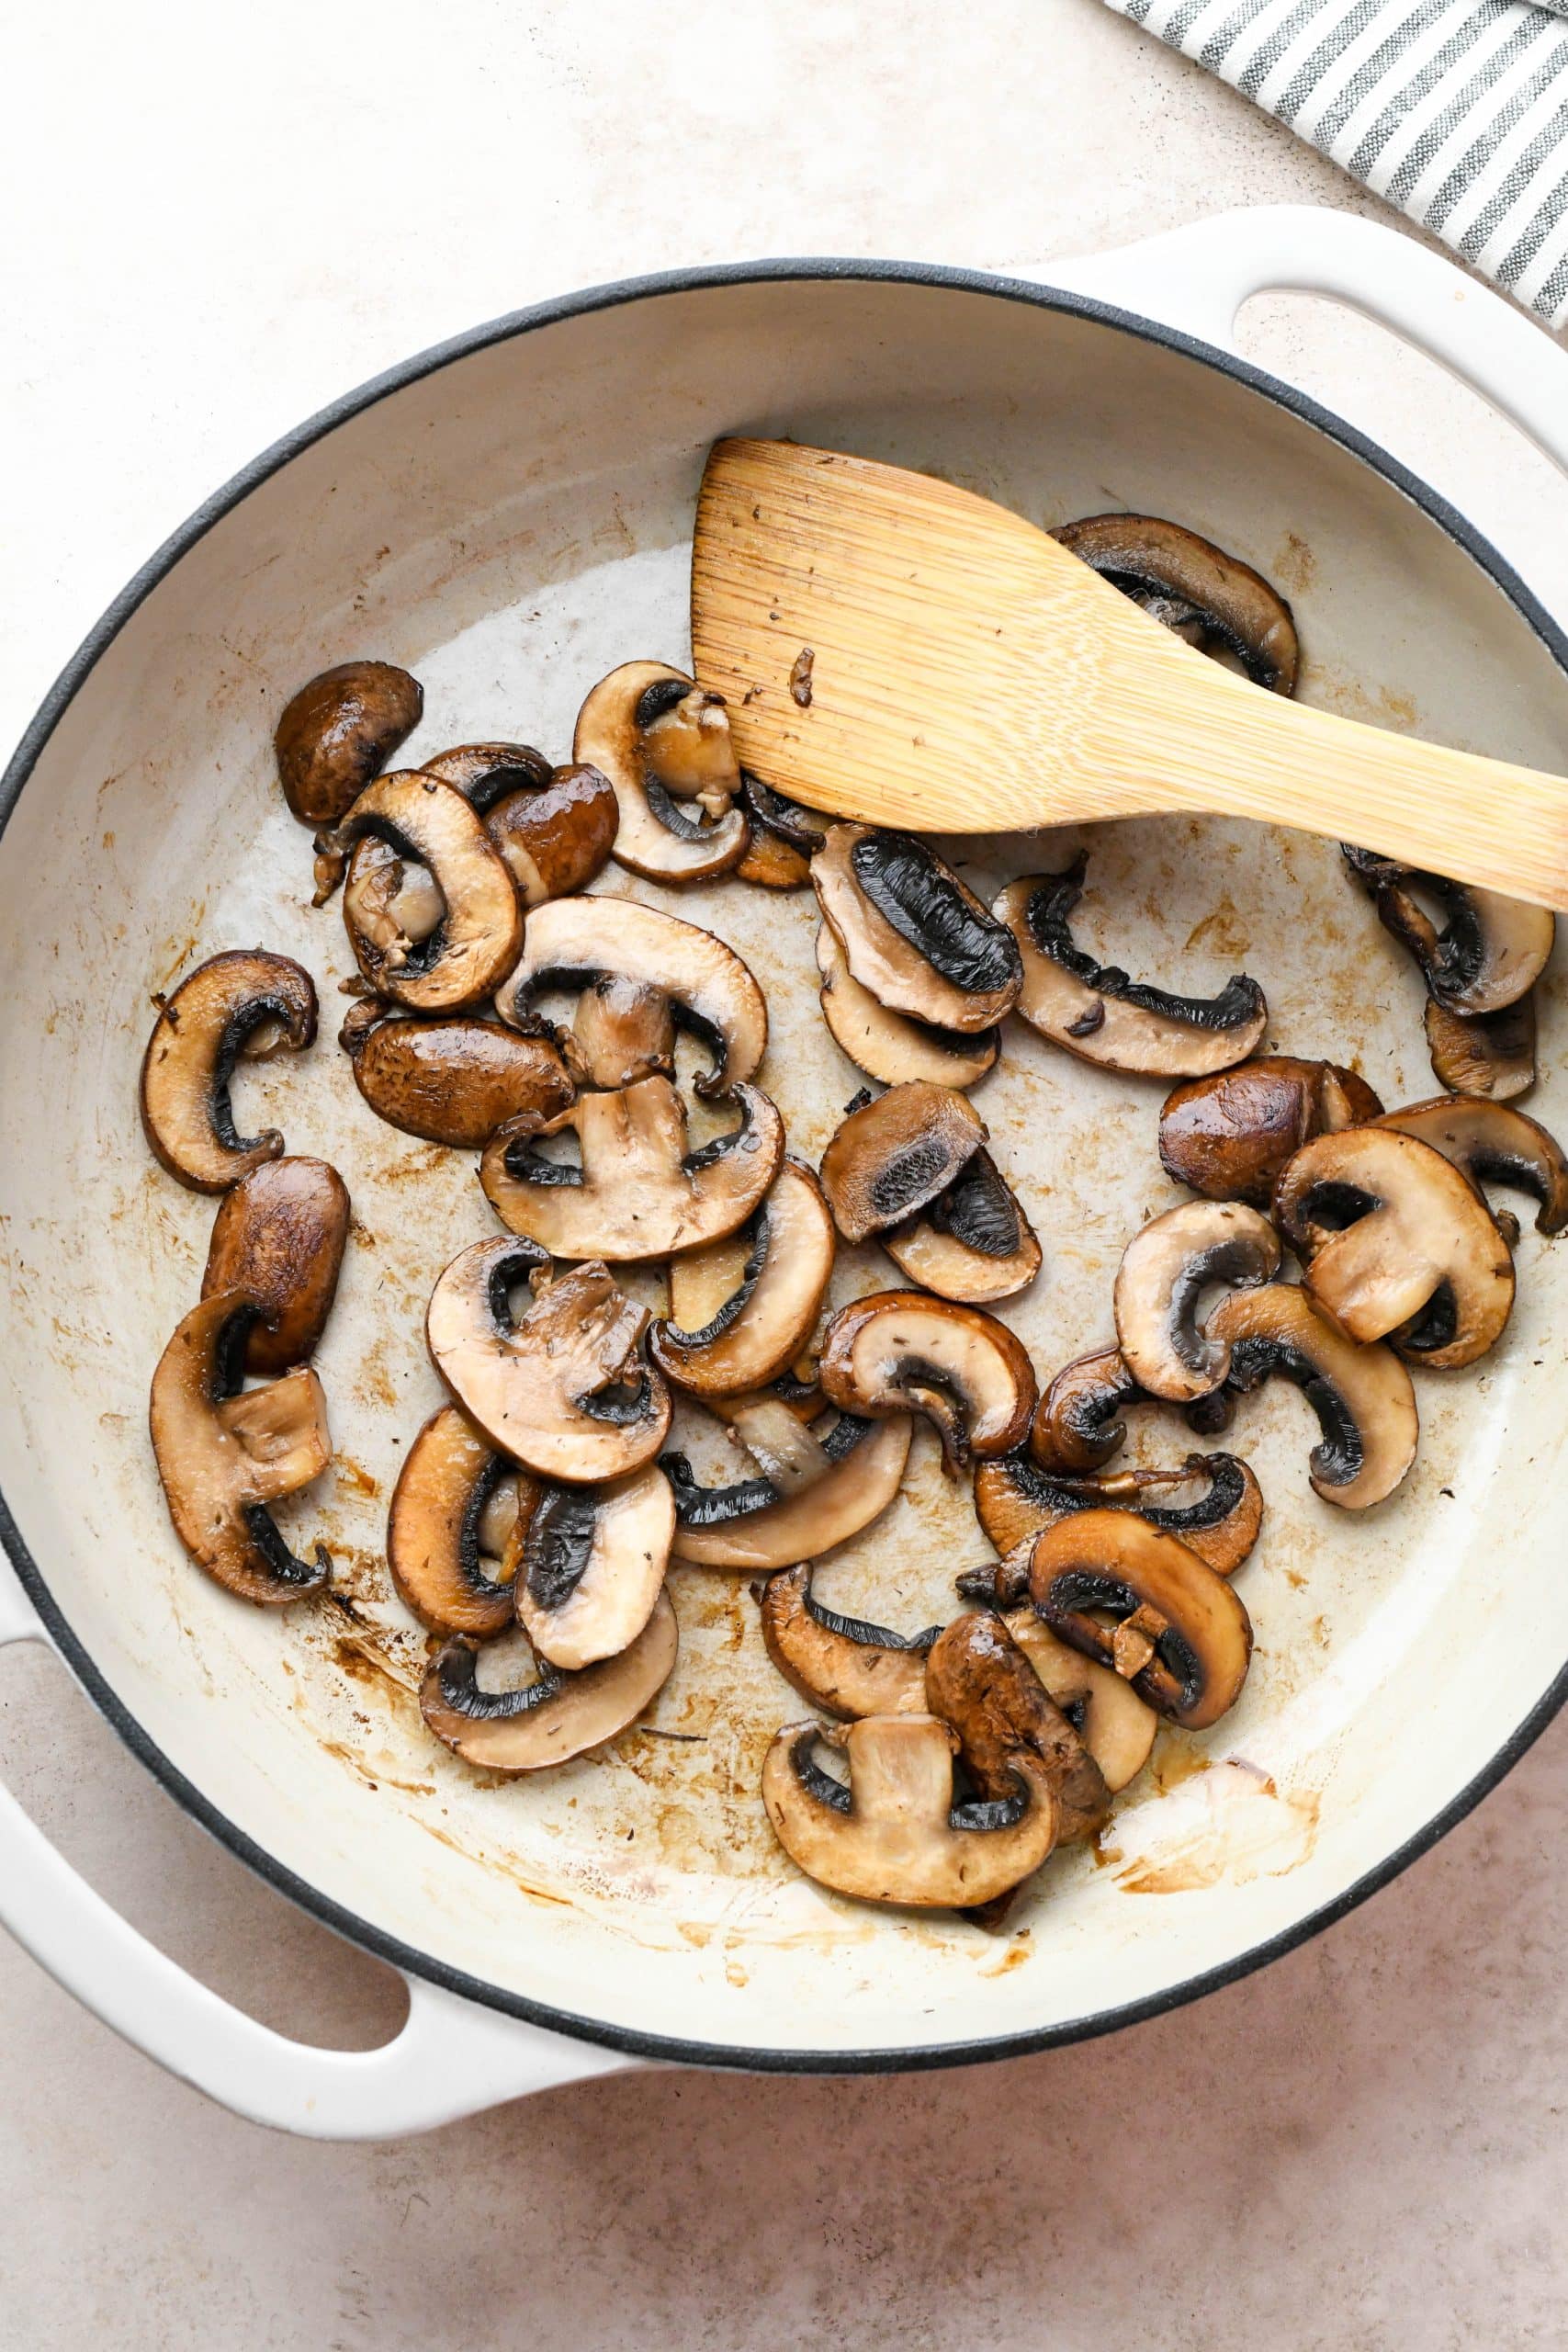 How to make soba noodle stir fry: Seared mushrooms in a skillet.